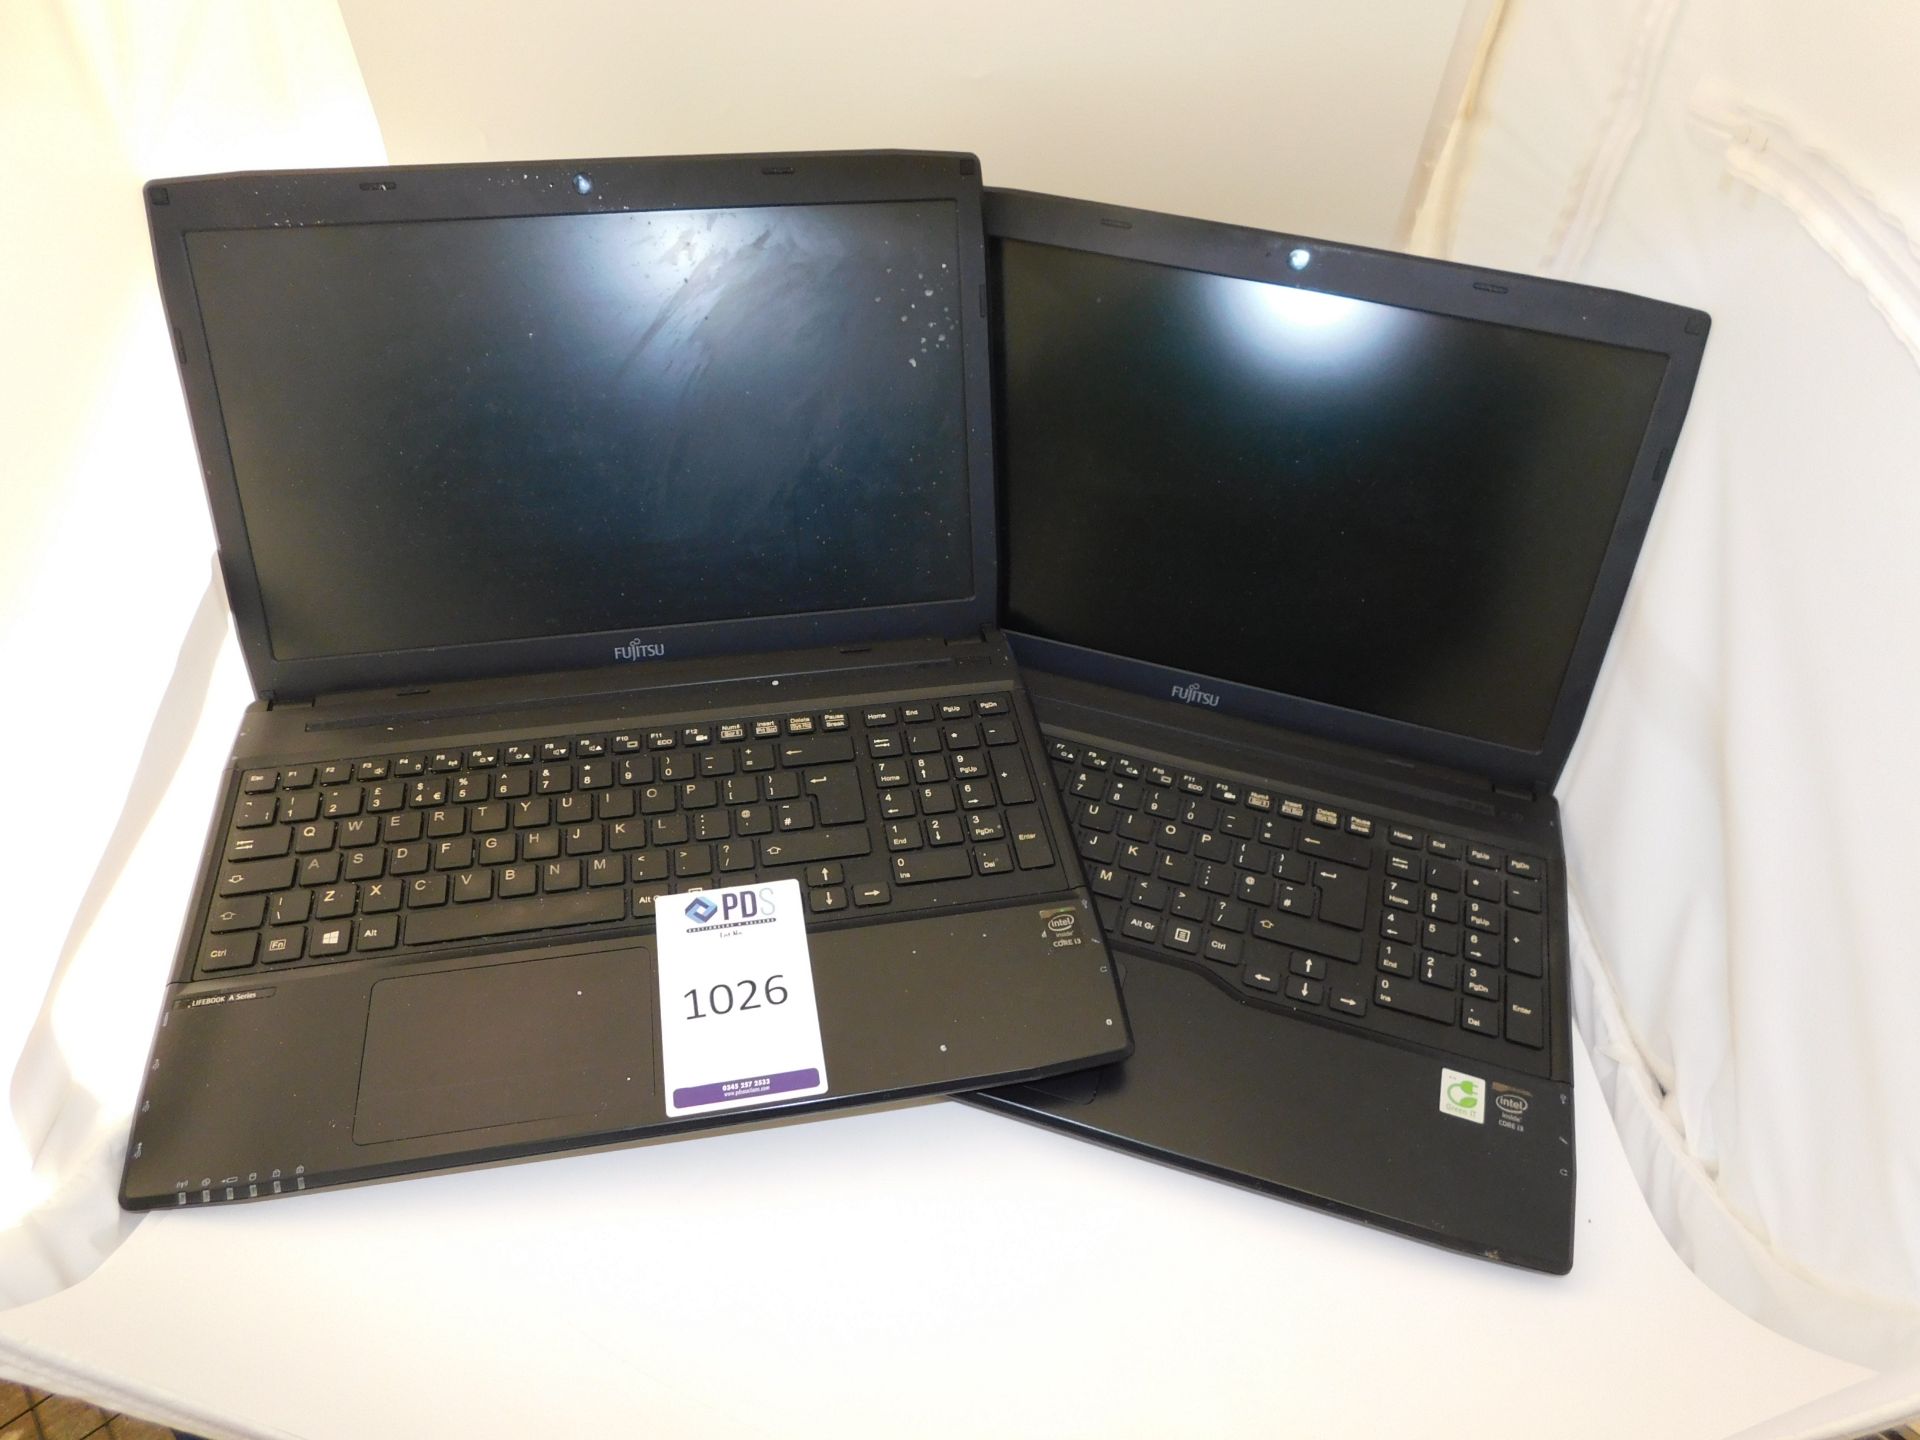 2 Fujitsu Laptops, i3, No PSU’s (No HDD’s) (Location Stockport. Please Refer to General Notes)